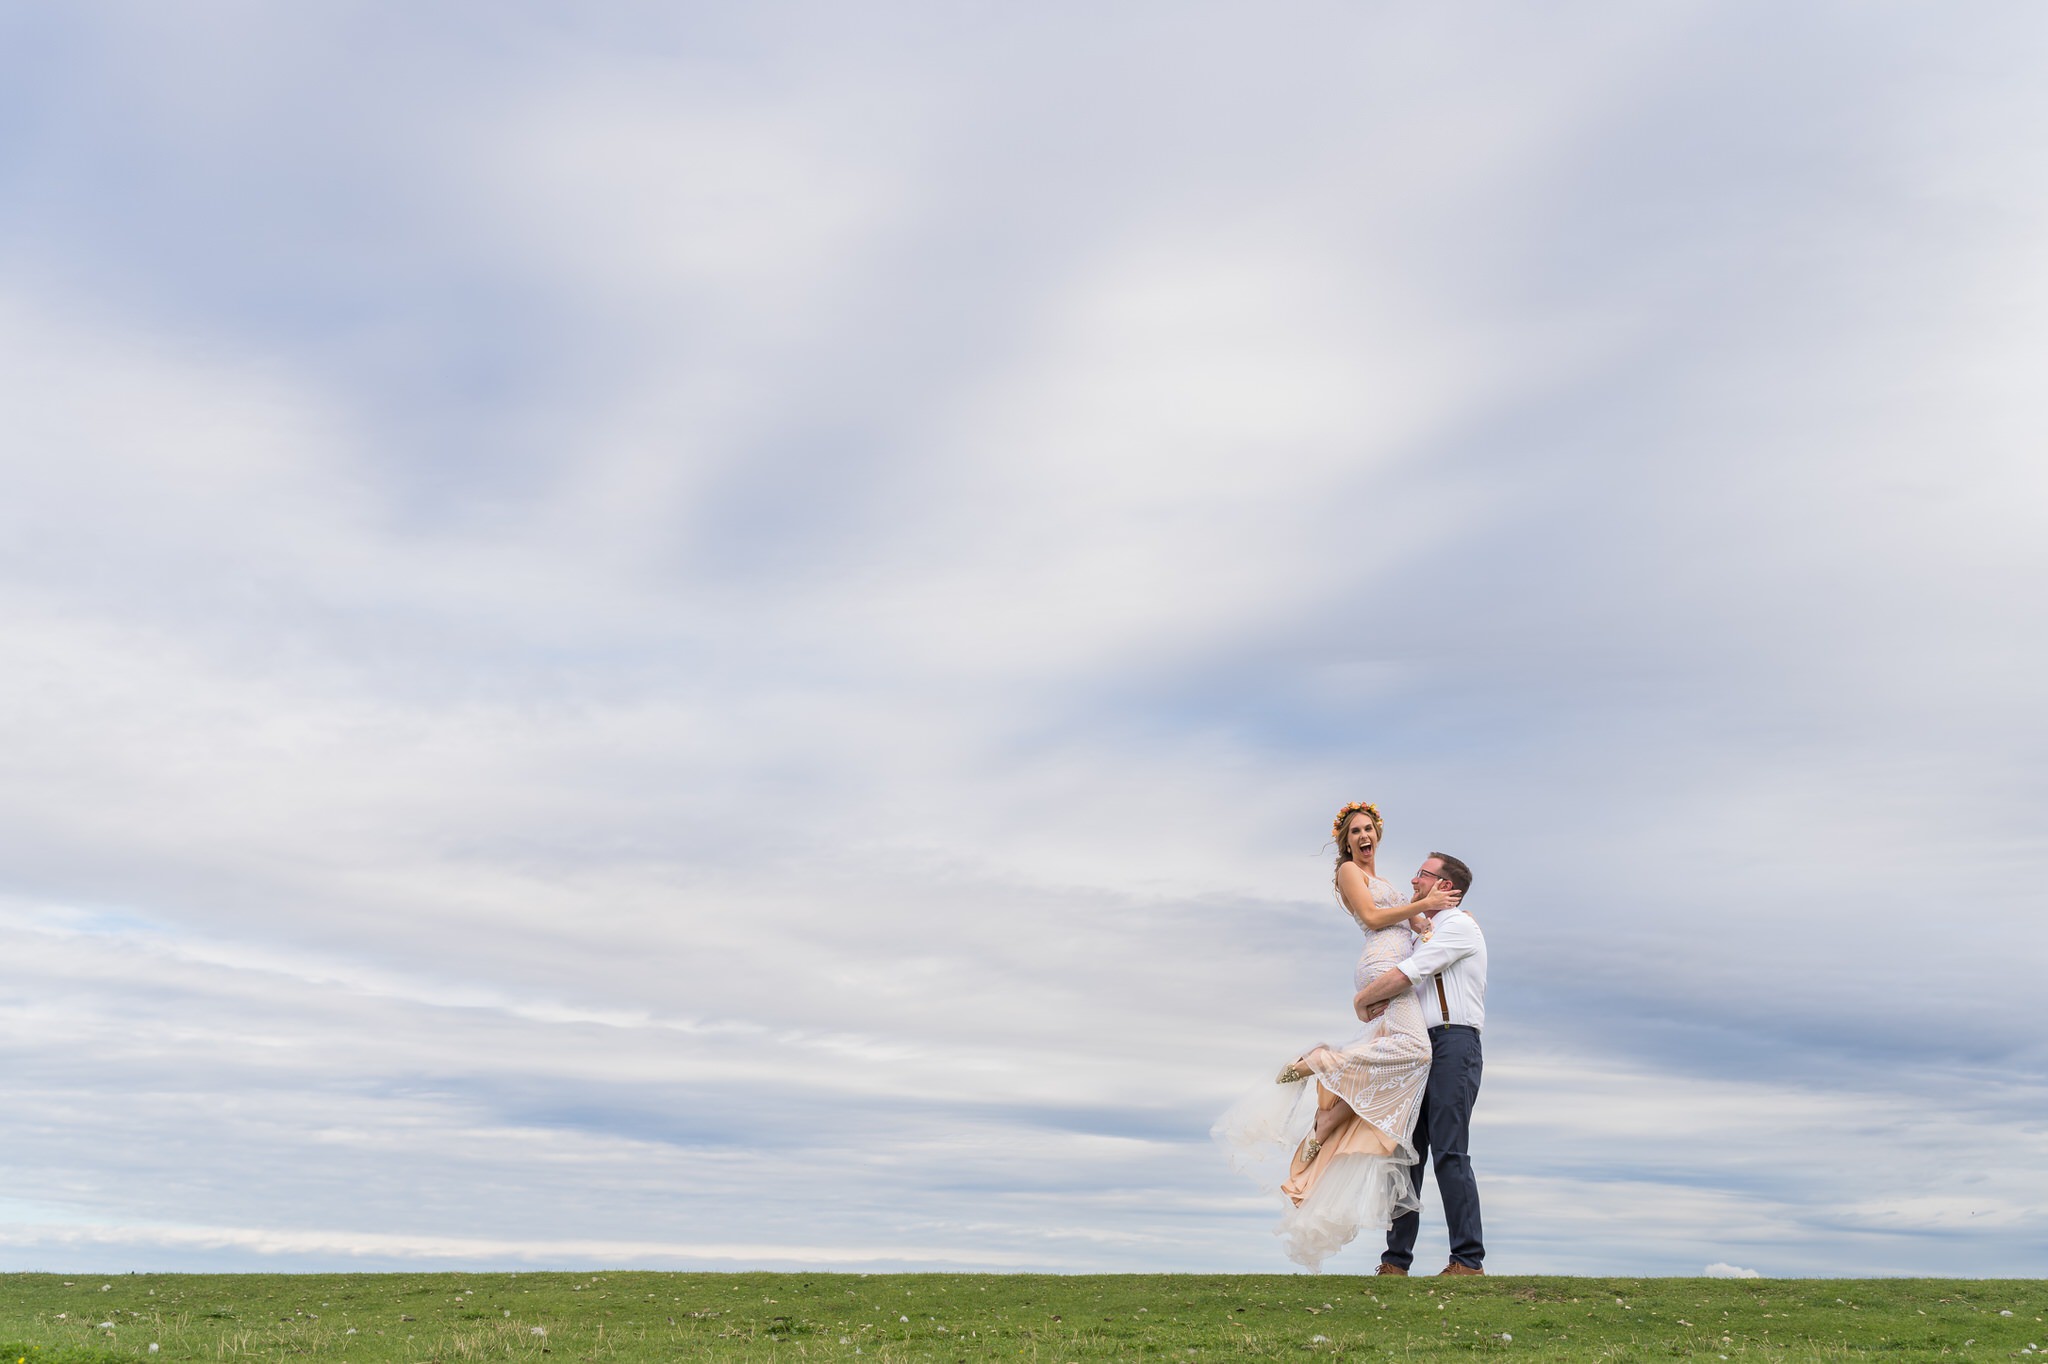 A groom lifts and twirls his bride on the grounds of a Mission Pointe Resort wedding.  